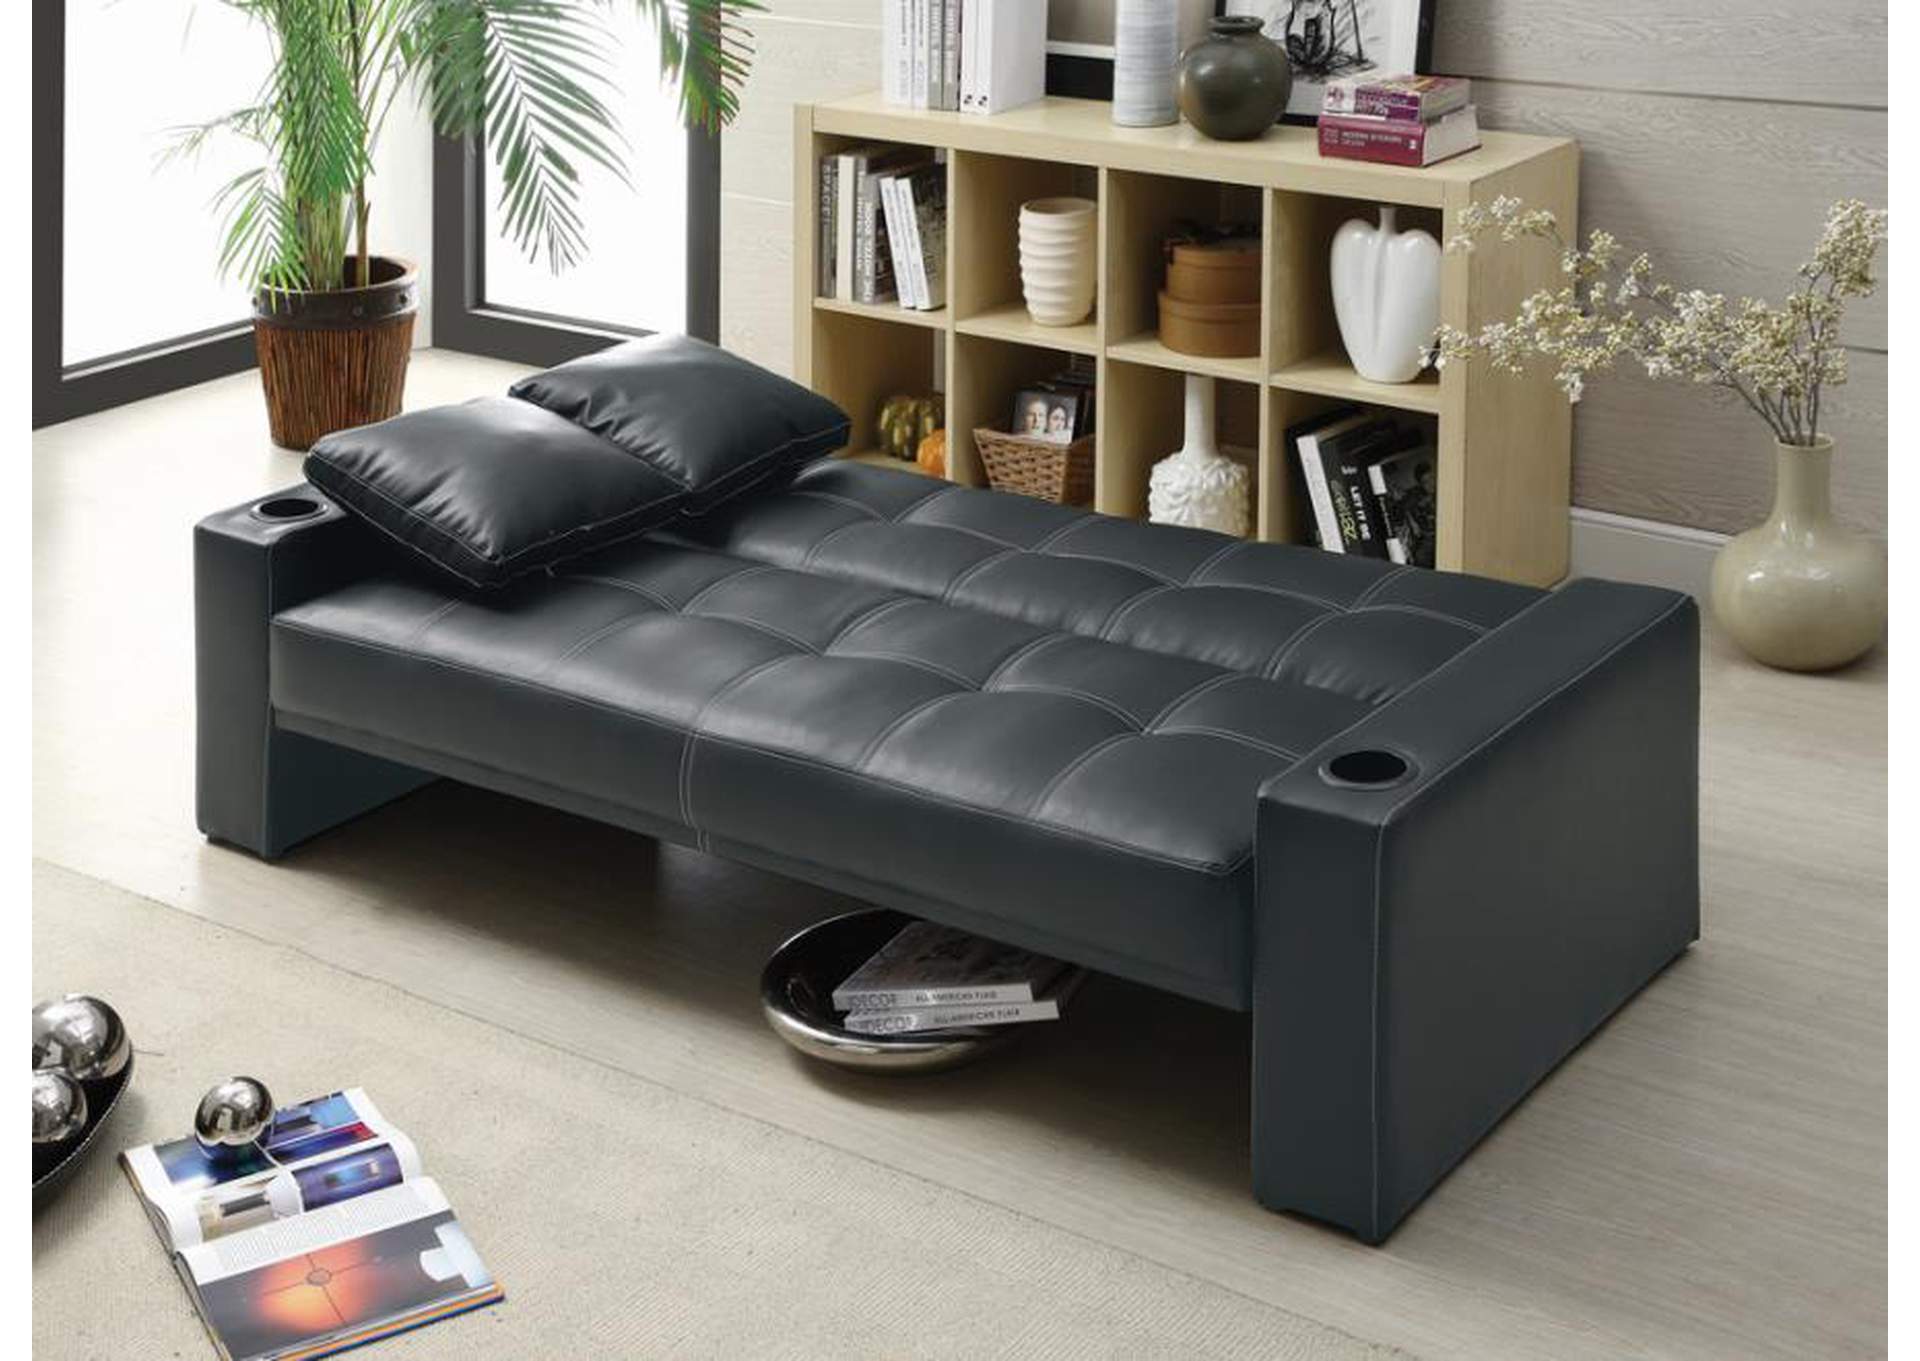 Spears Sofa Bed with Cup Holders in Armrests Black,Coaster Furniture